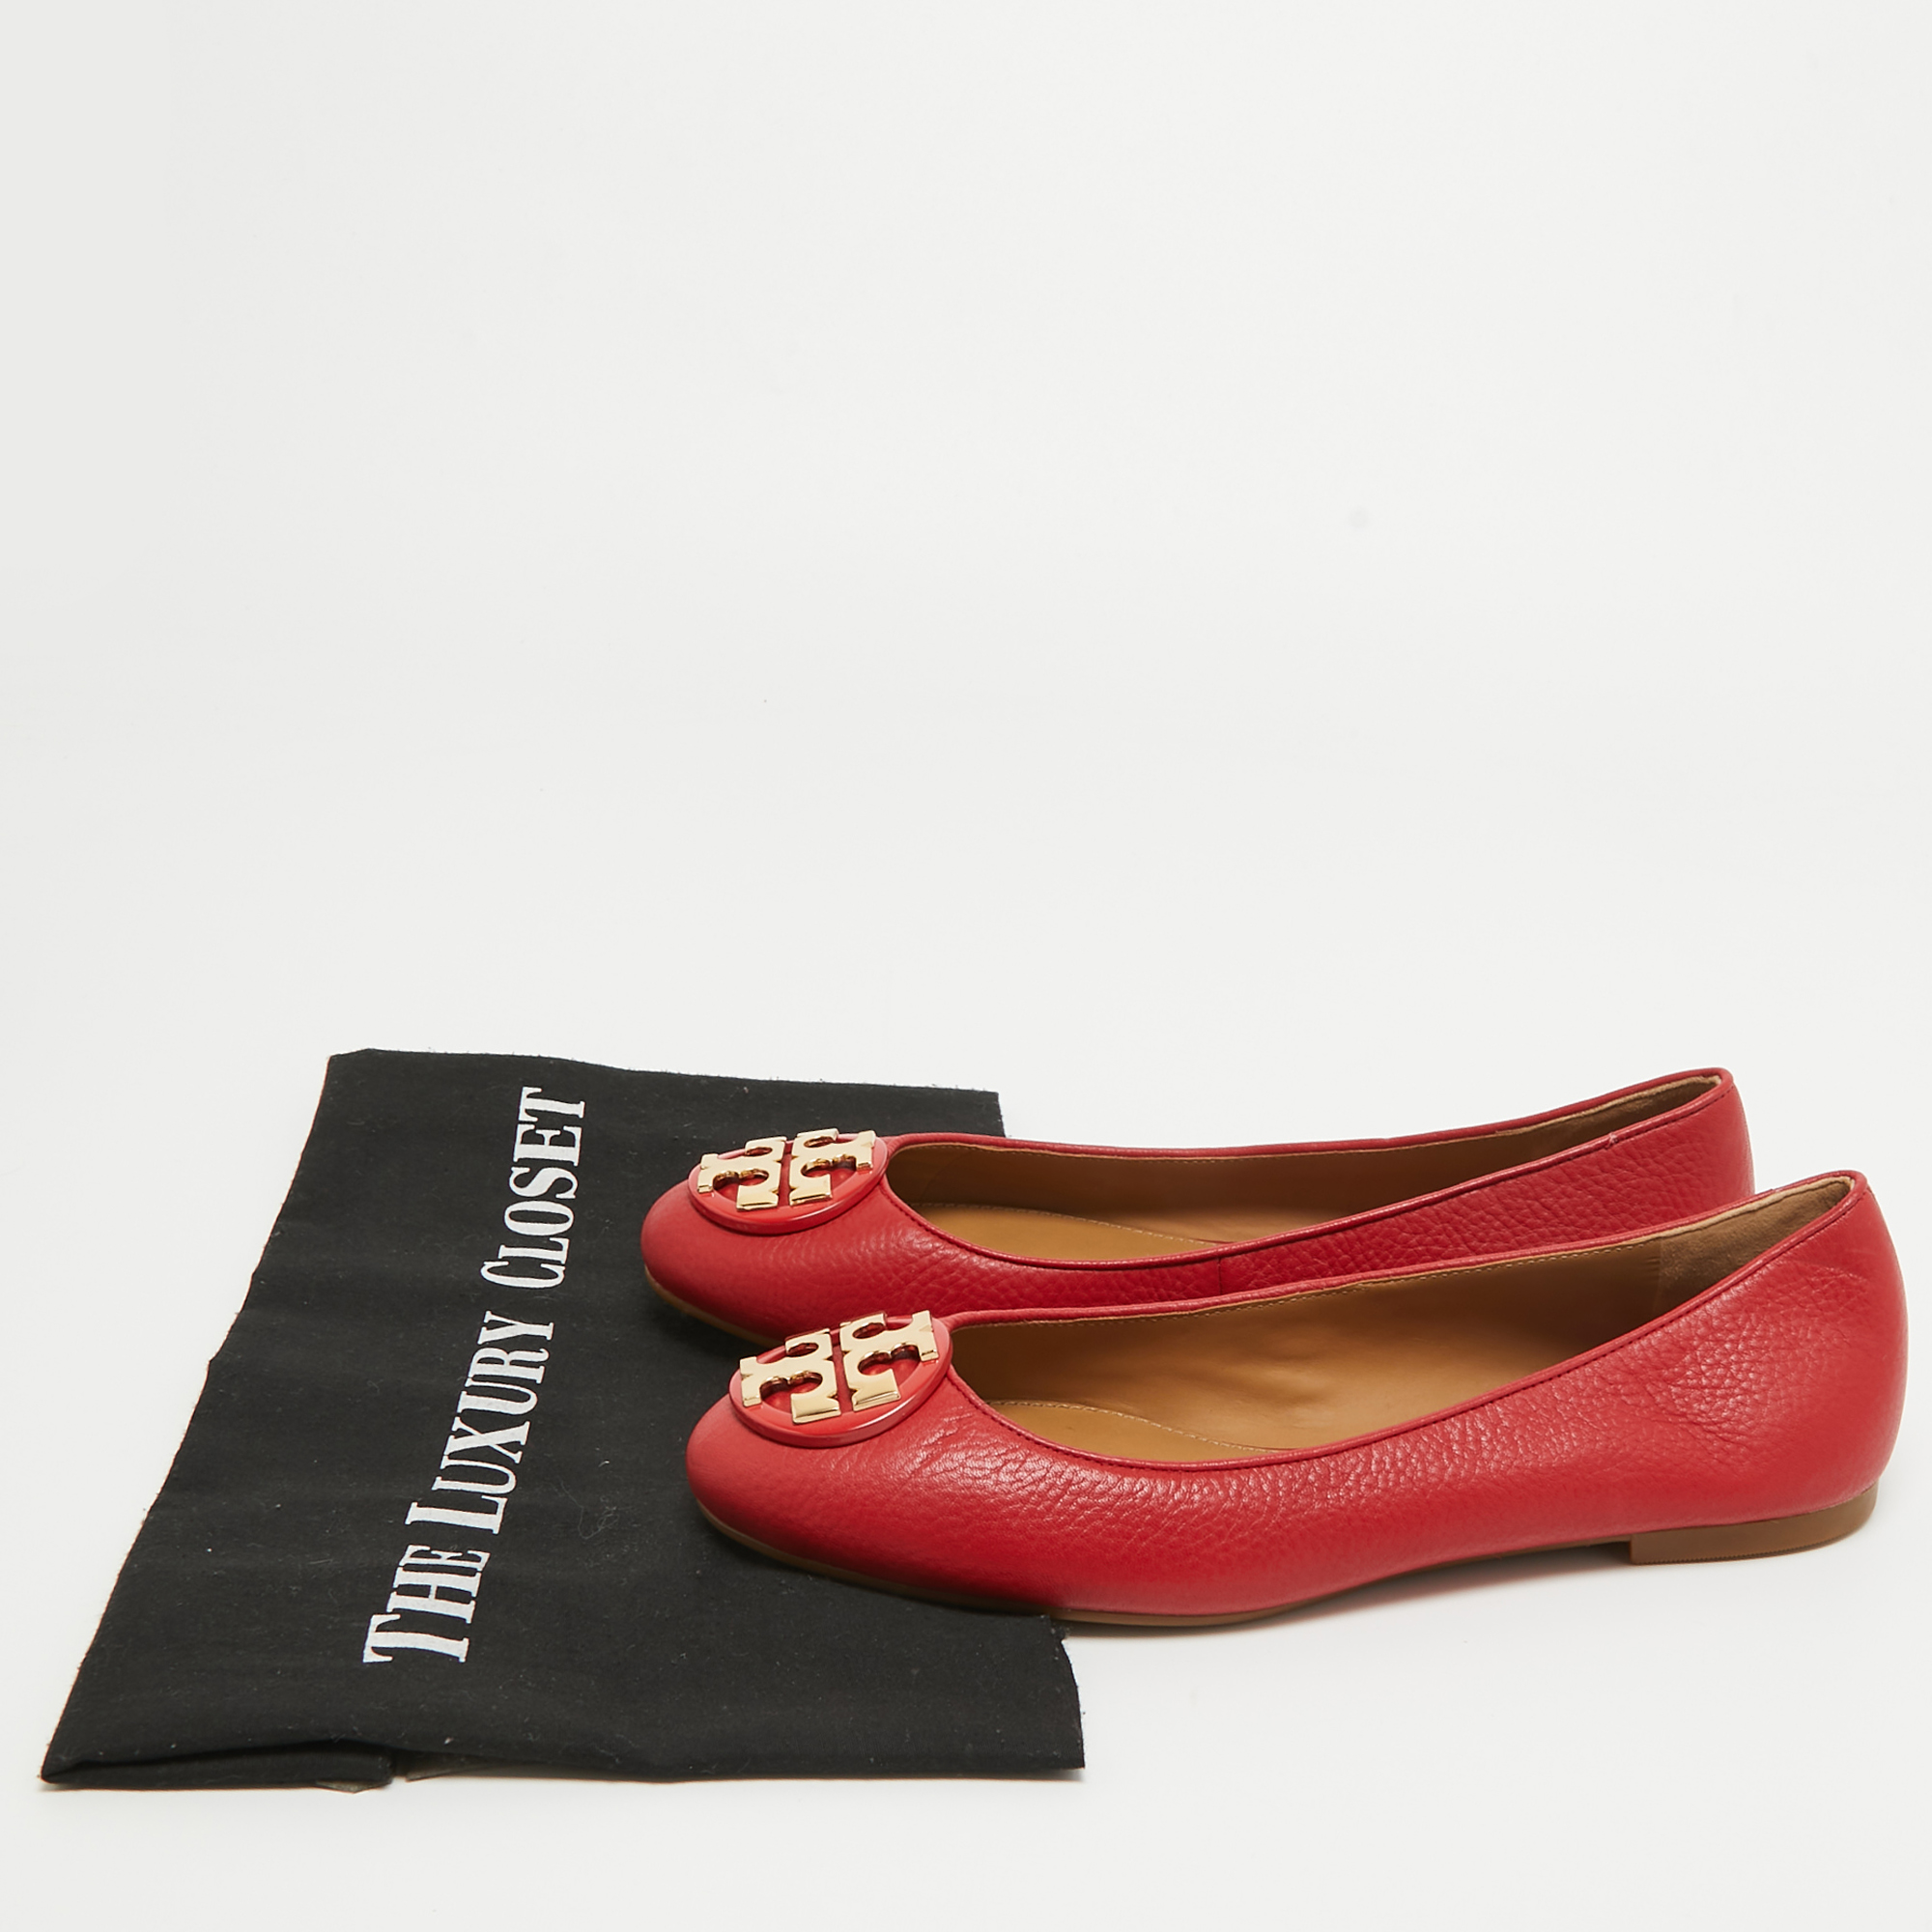 Tory Burch Red Leather Reva Ballet Flats Size 37.5